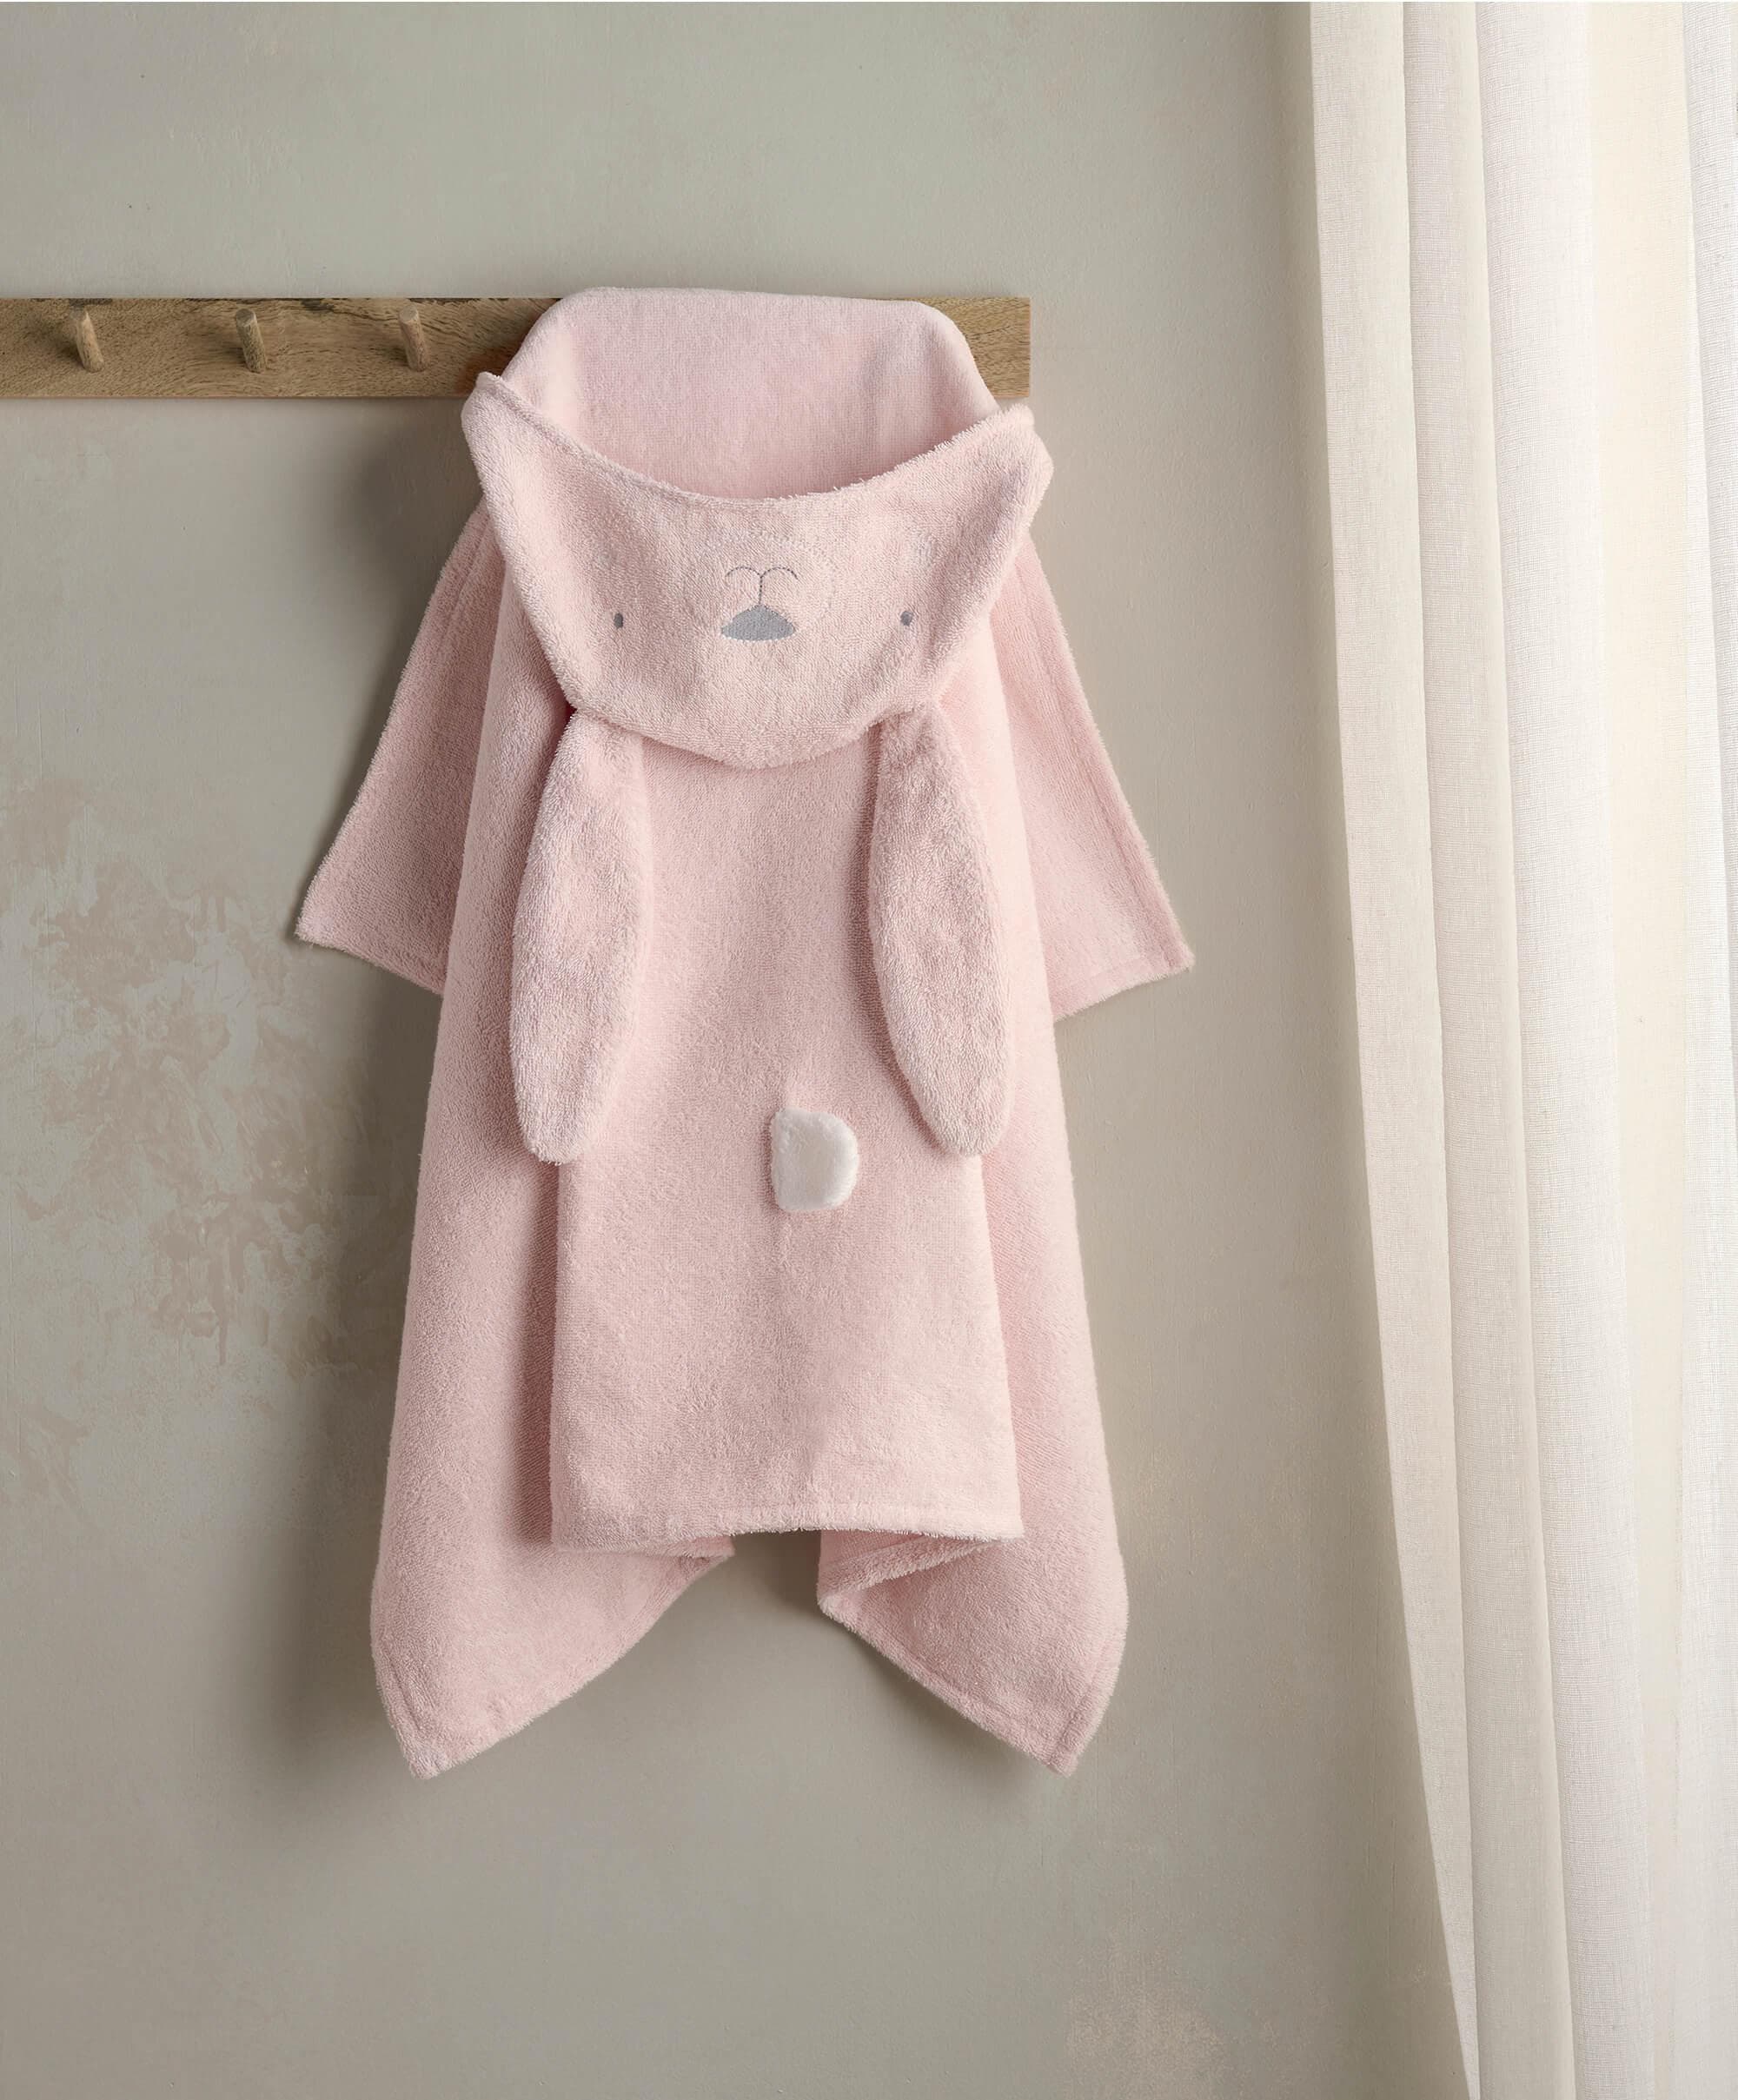 Hooded Baby Towel - Pink Bunny